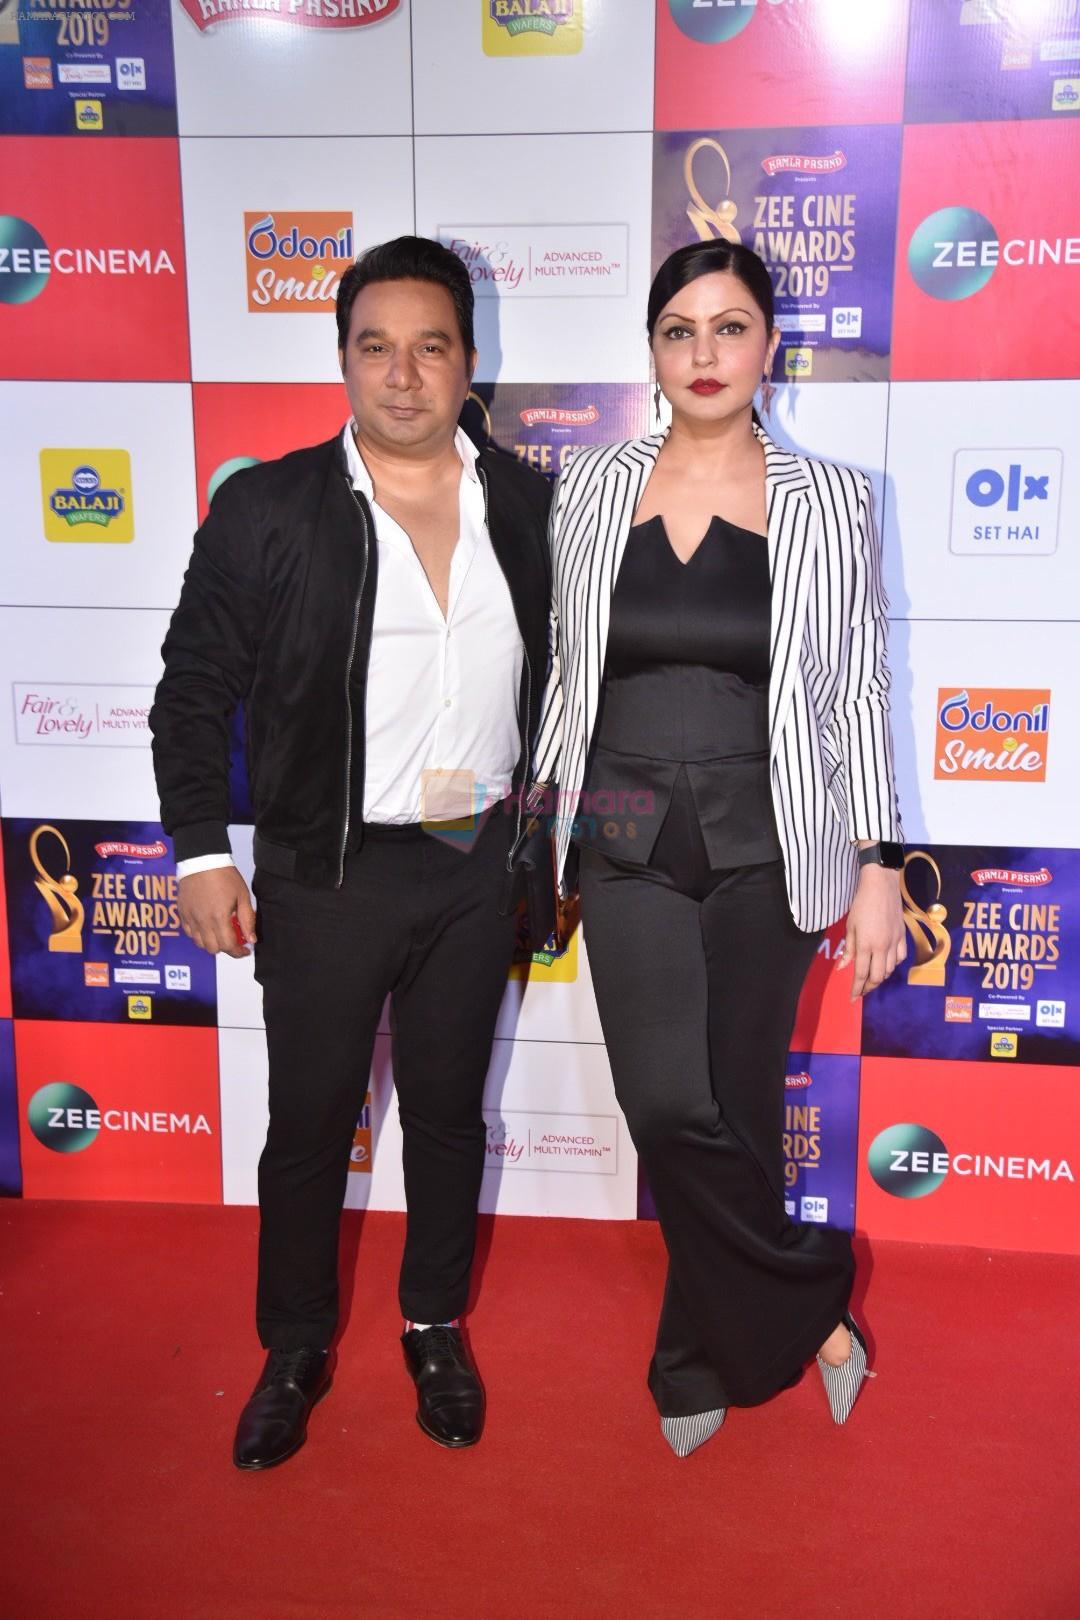 Ahmad Khan at Zee cine awards red carpet on 19th March 2019